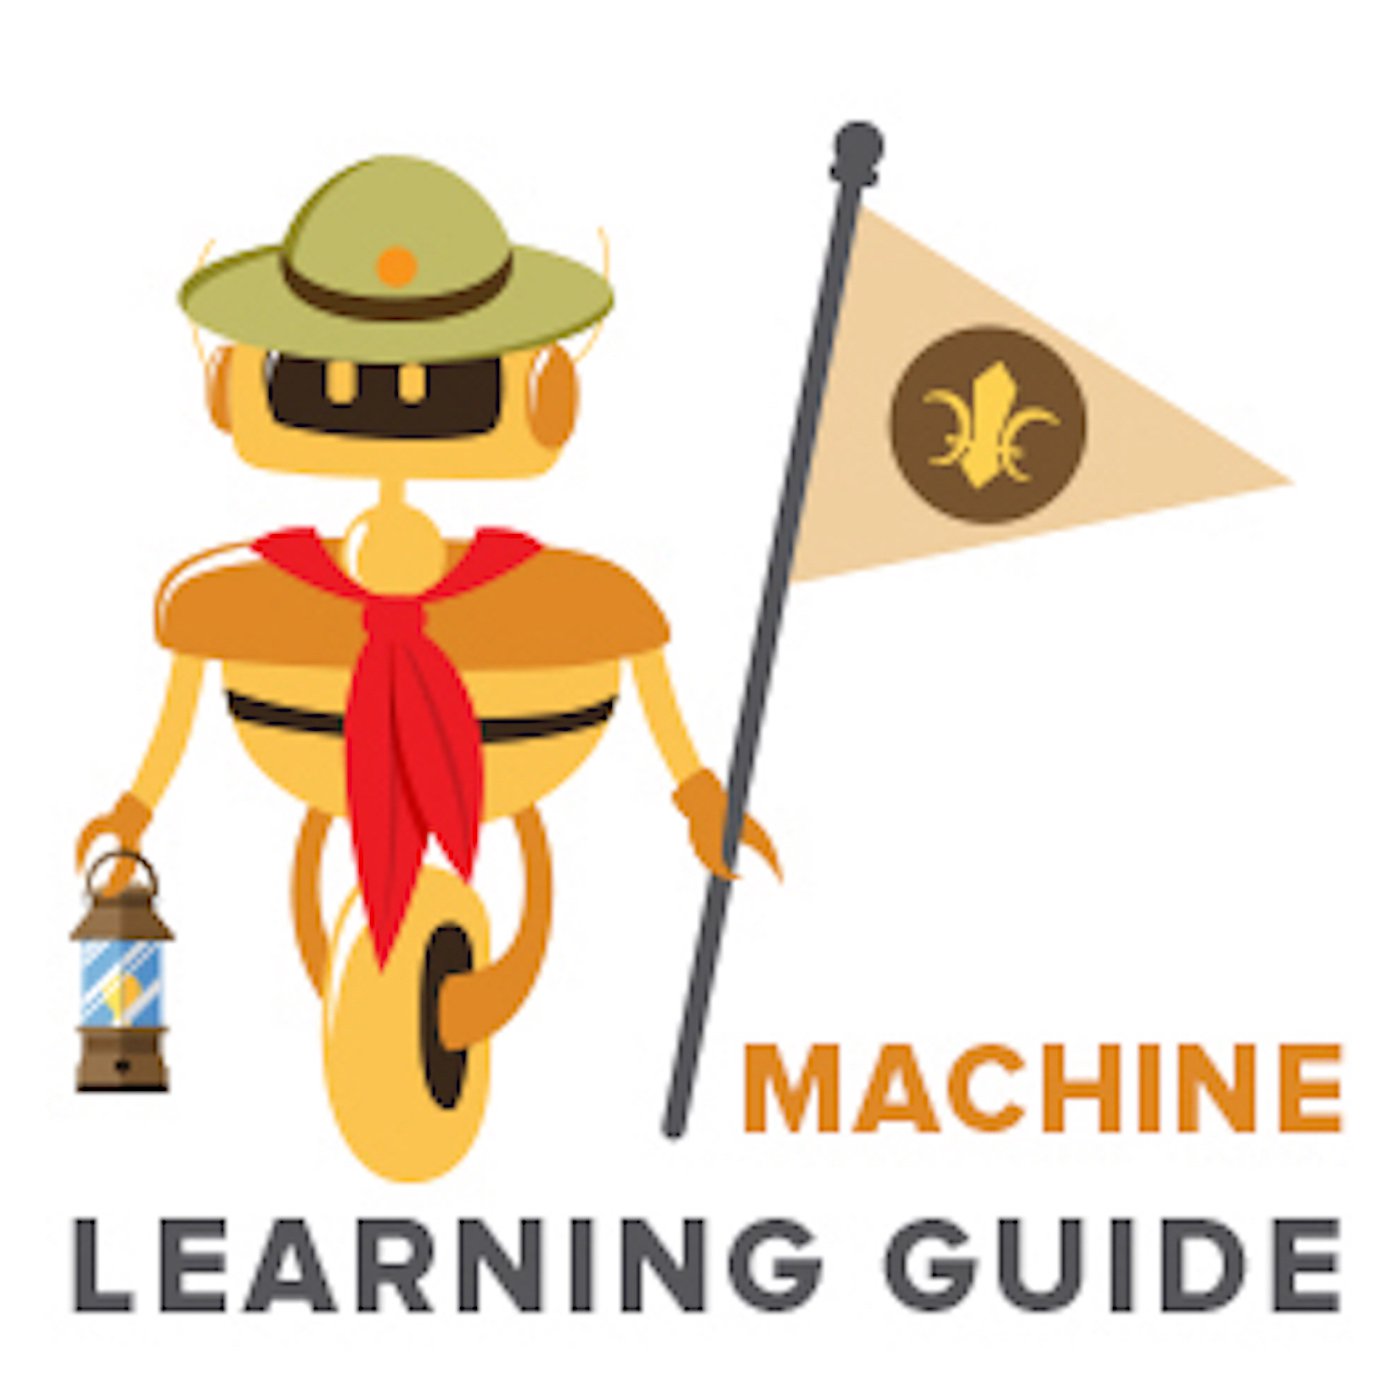 Machine Learning Guide Podcast Logo